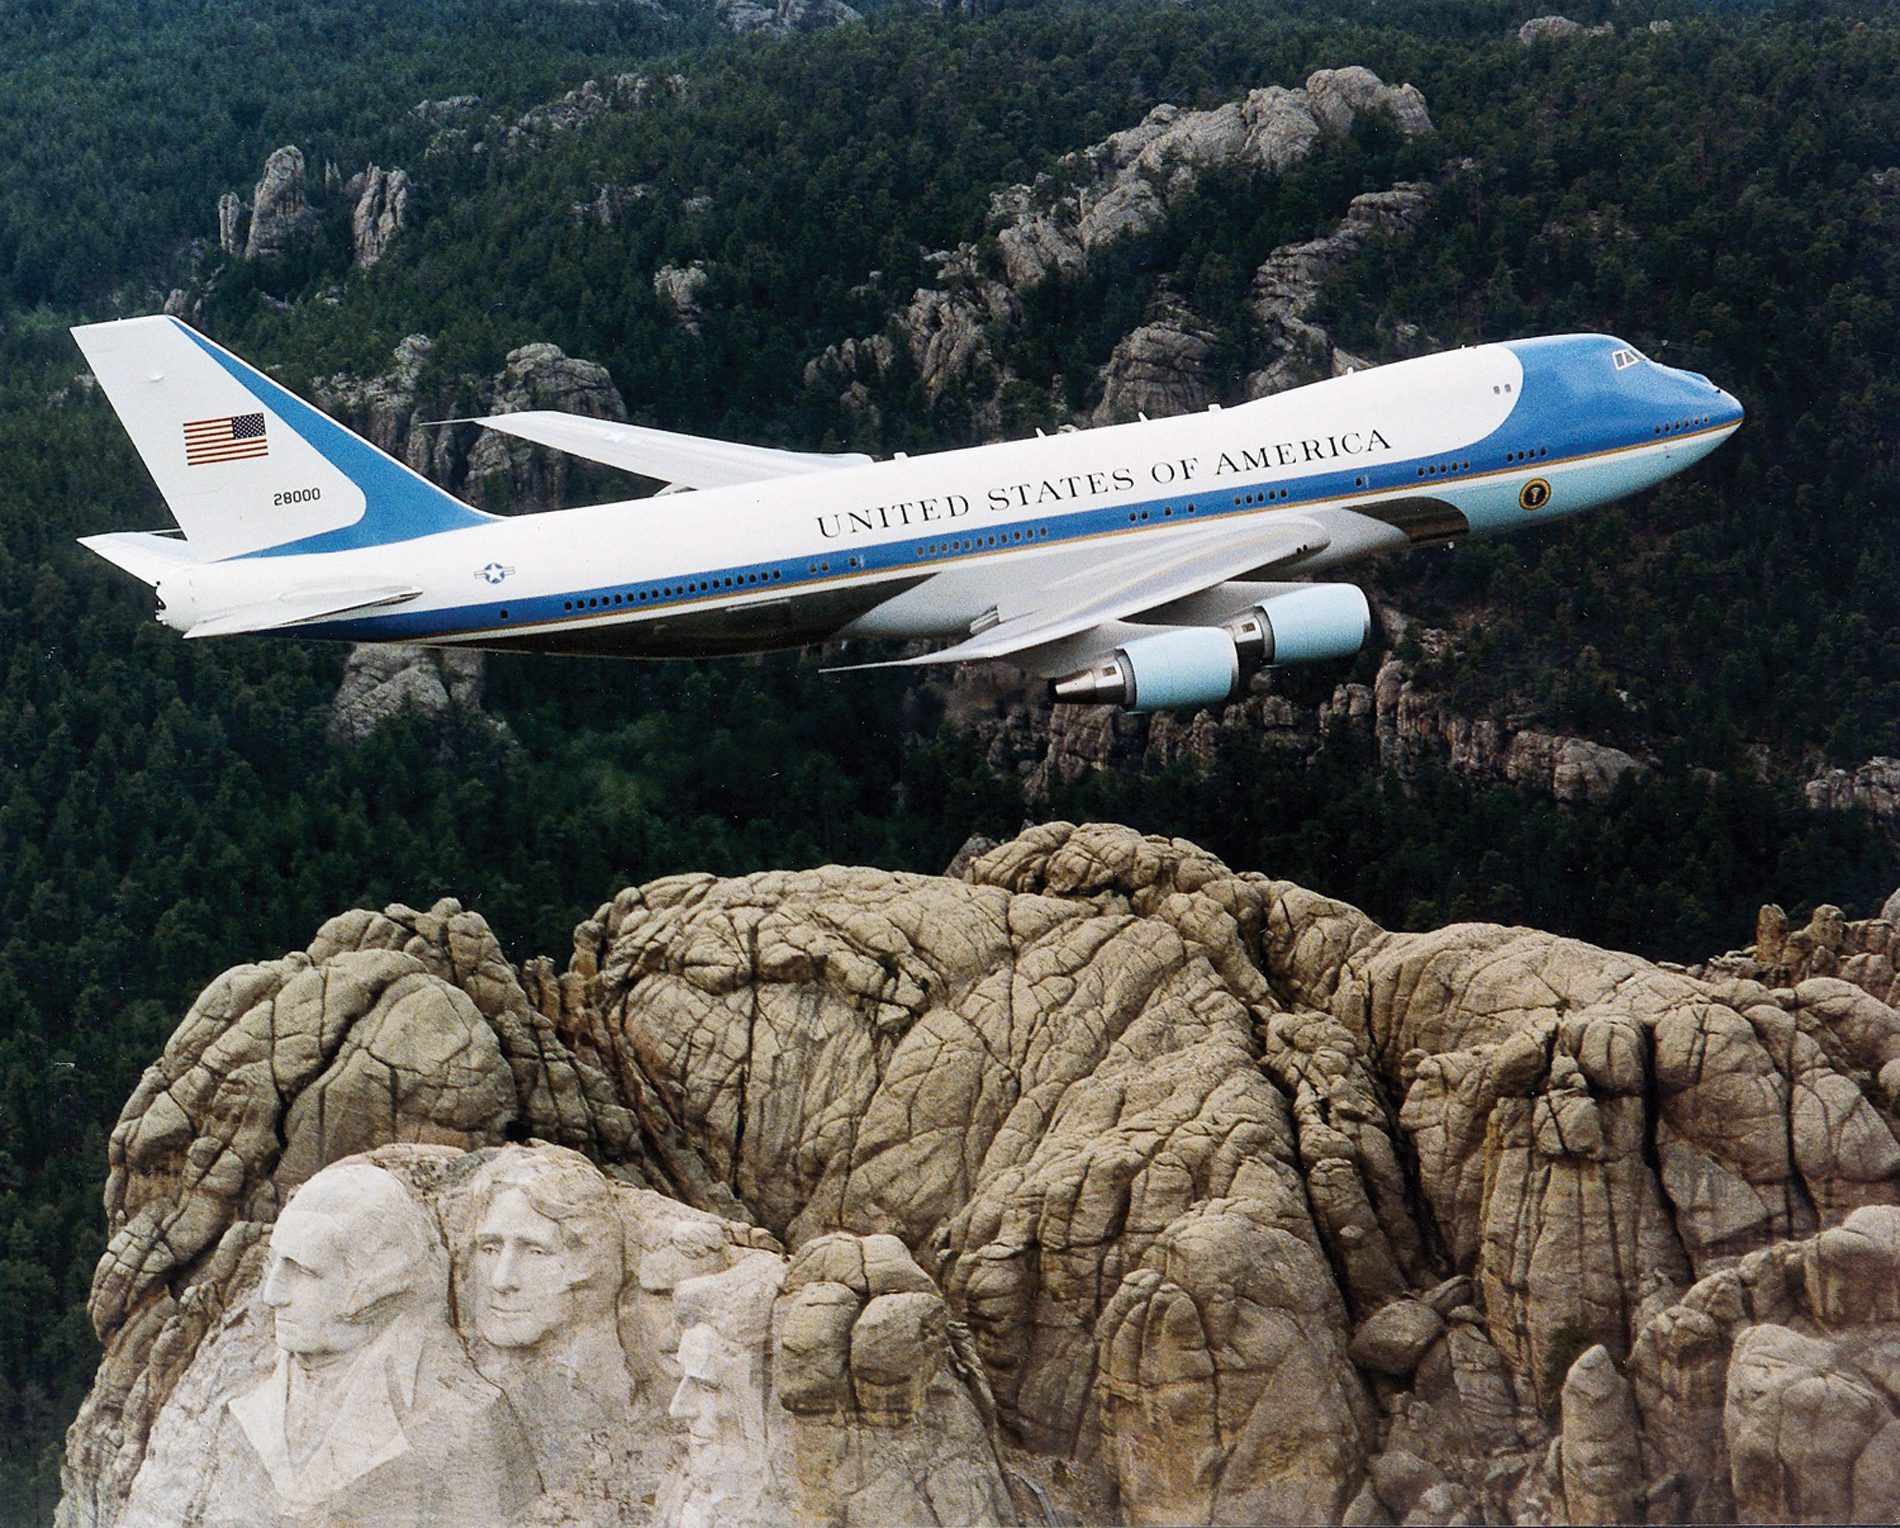 SAM 28000, one of the two VC-25As used as Air Force One, flying over Mount Rushmore in February 2001.